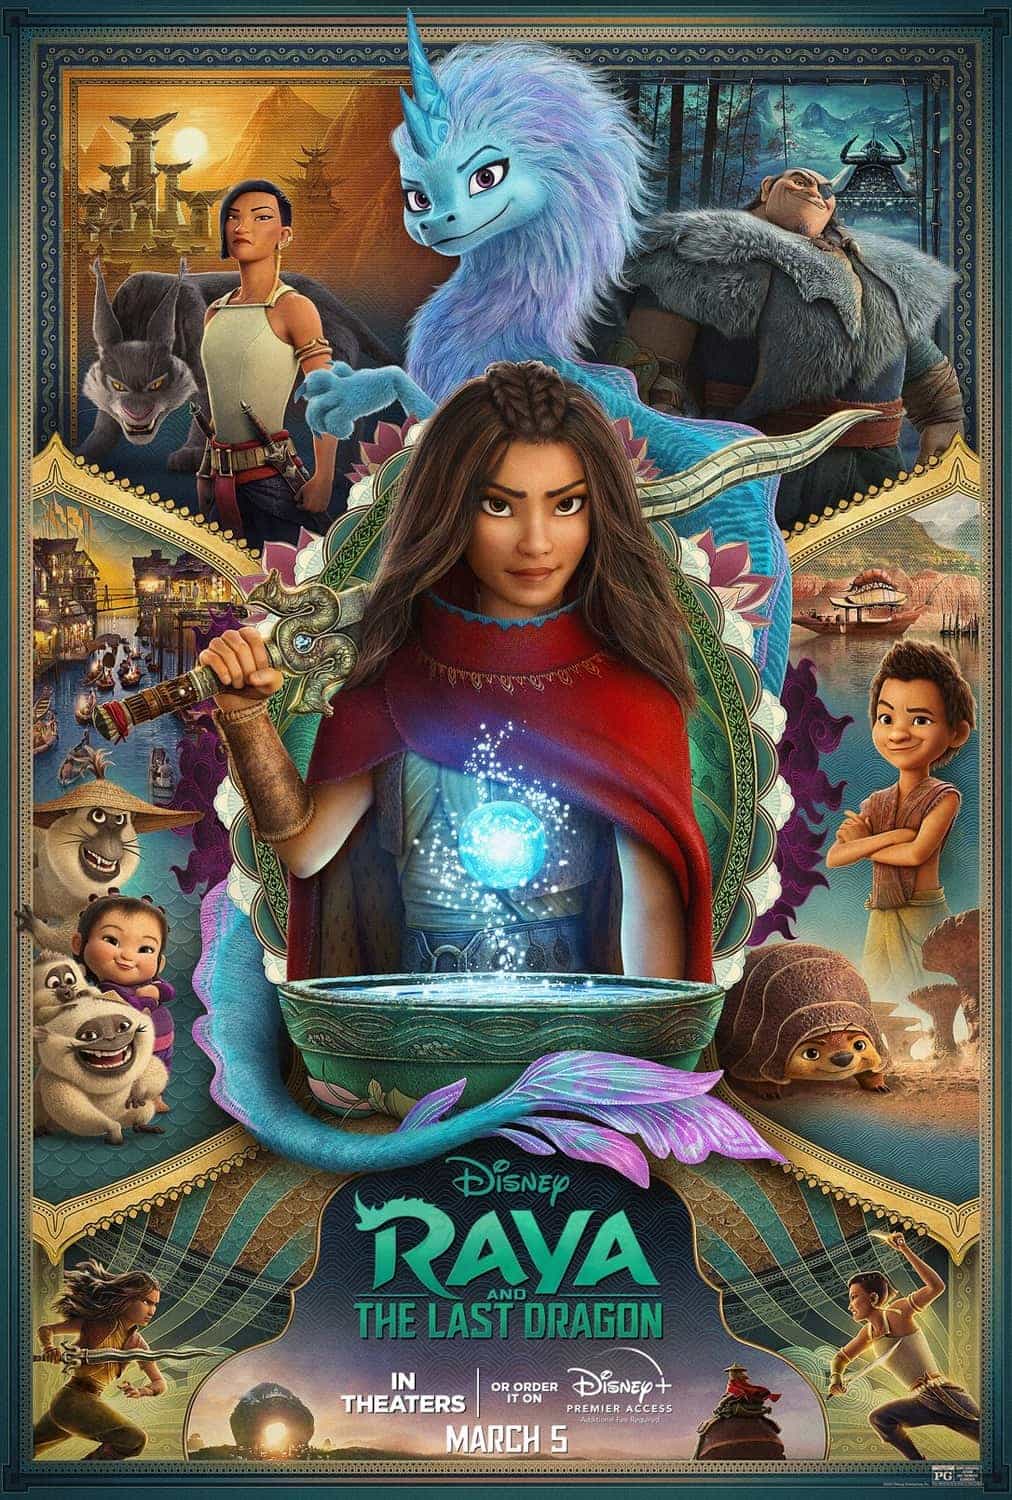 US Box Office Weekend Report 12th - 14th March 2021:  Raya spends a second week at the top as cinemas begin to reopen across North America